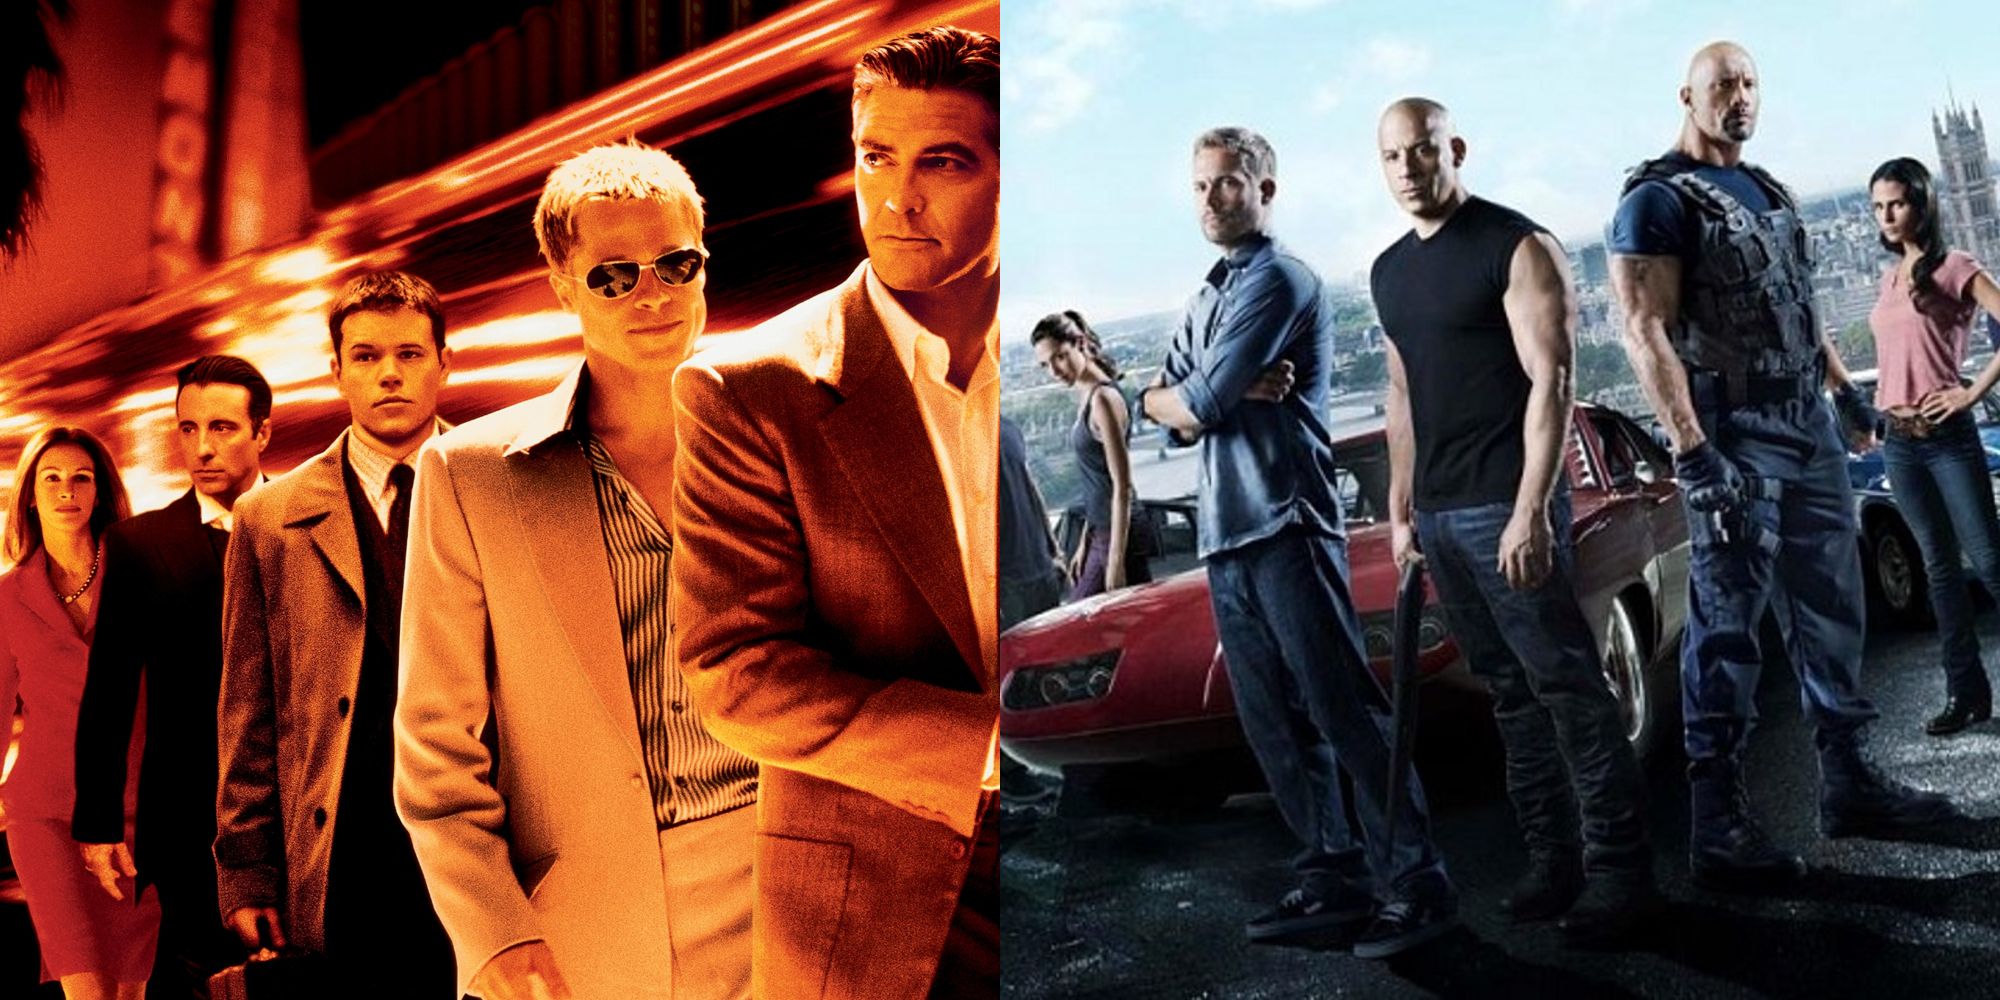 The cast of Ocean's Eleven and Fast & Furious